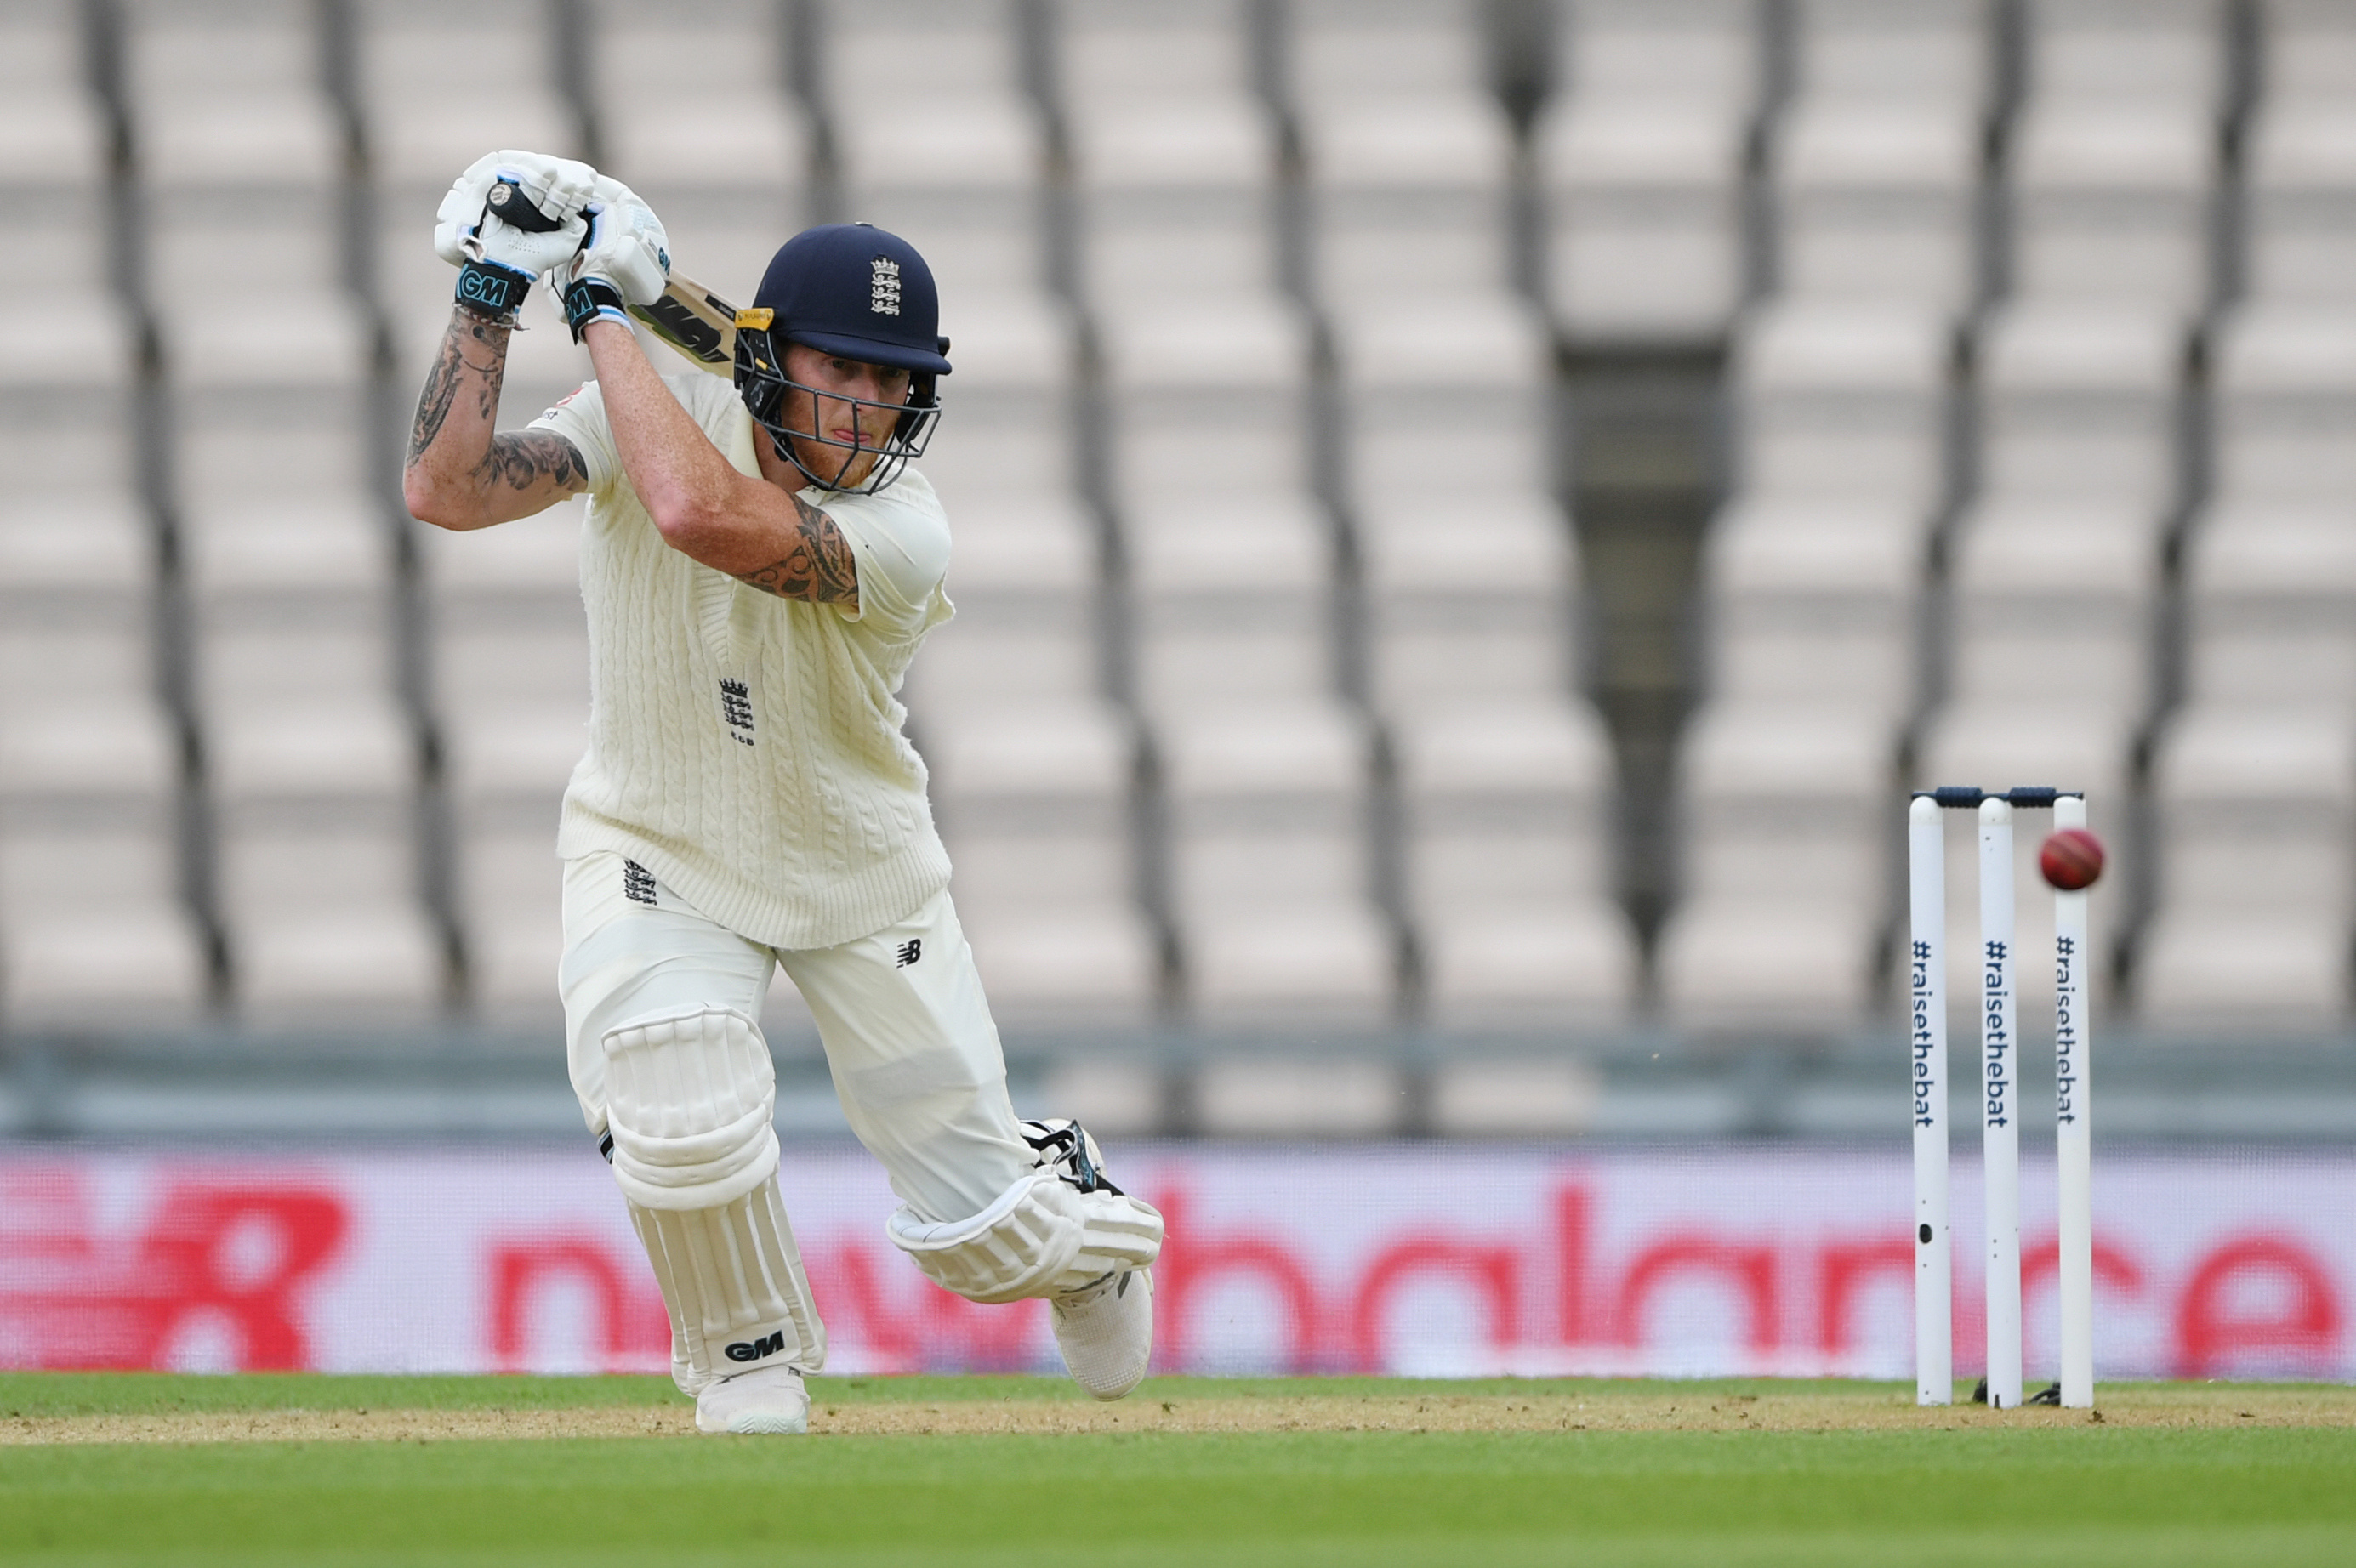 England's Ben Stokes in action, as play resumes behind closed doors following the outbreak of the coronavirus disease (COVID-19). Photo: Reuters  